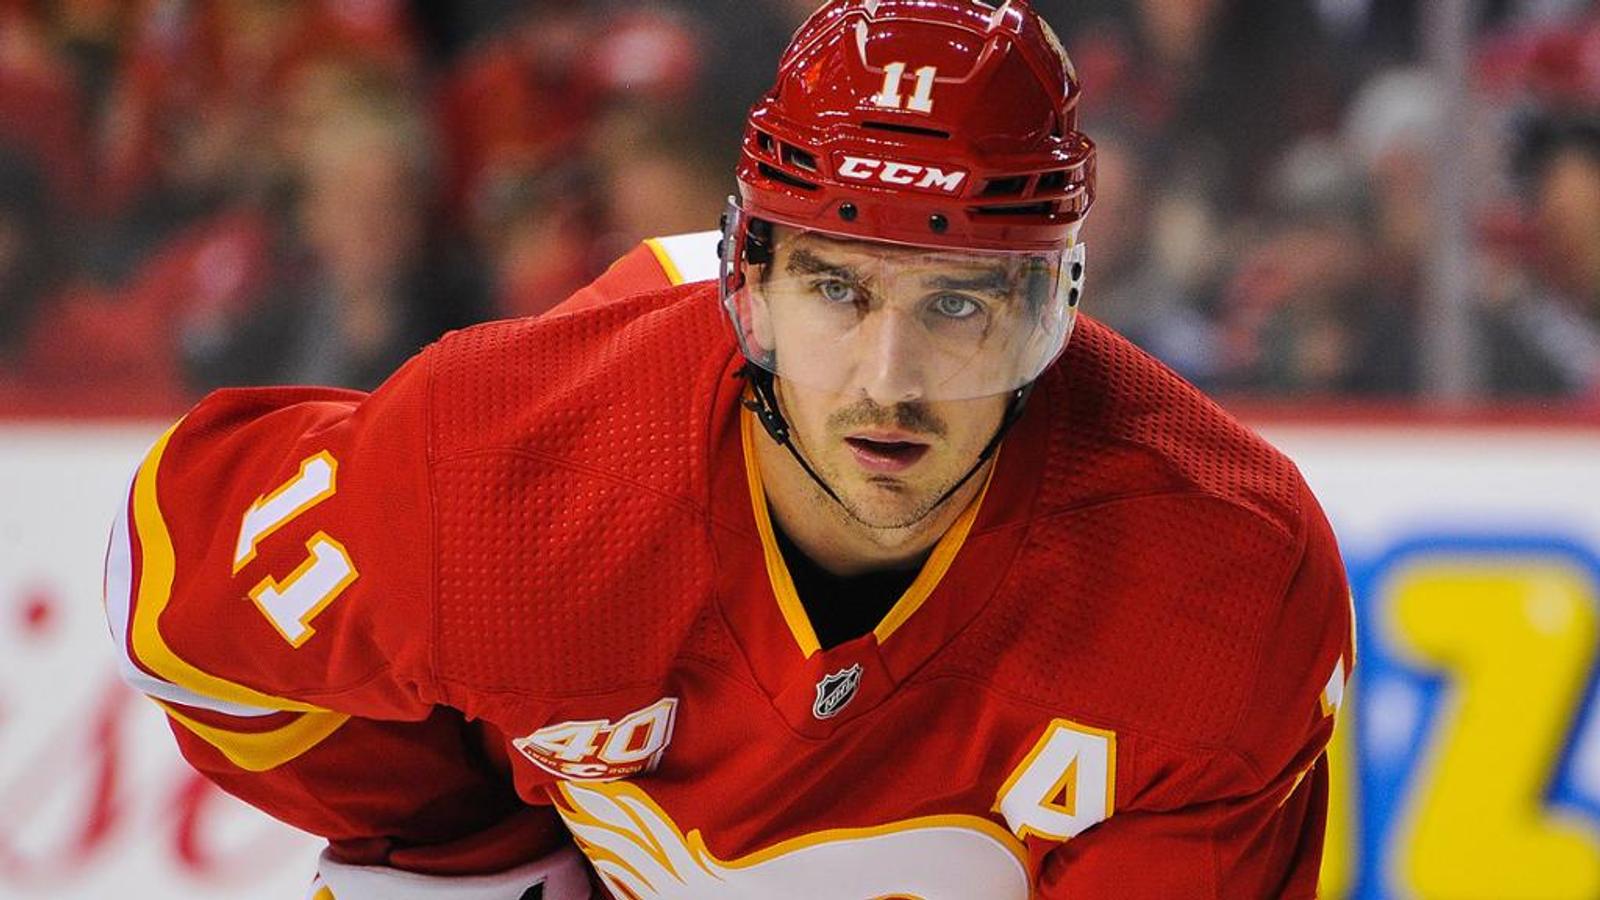 Flames' Mikael Backlund trolls Jets over losing 